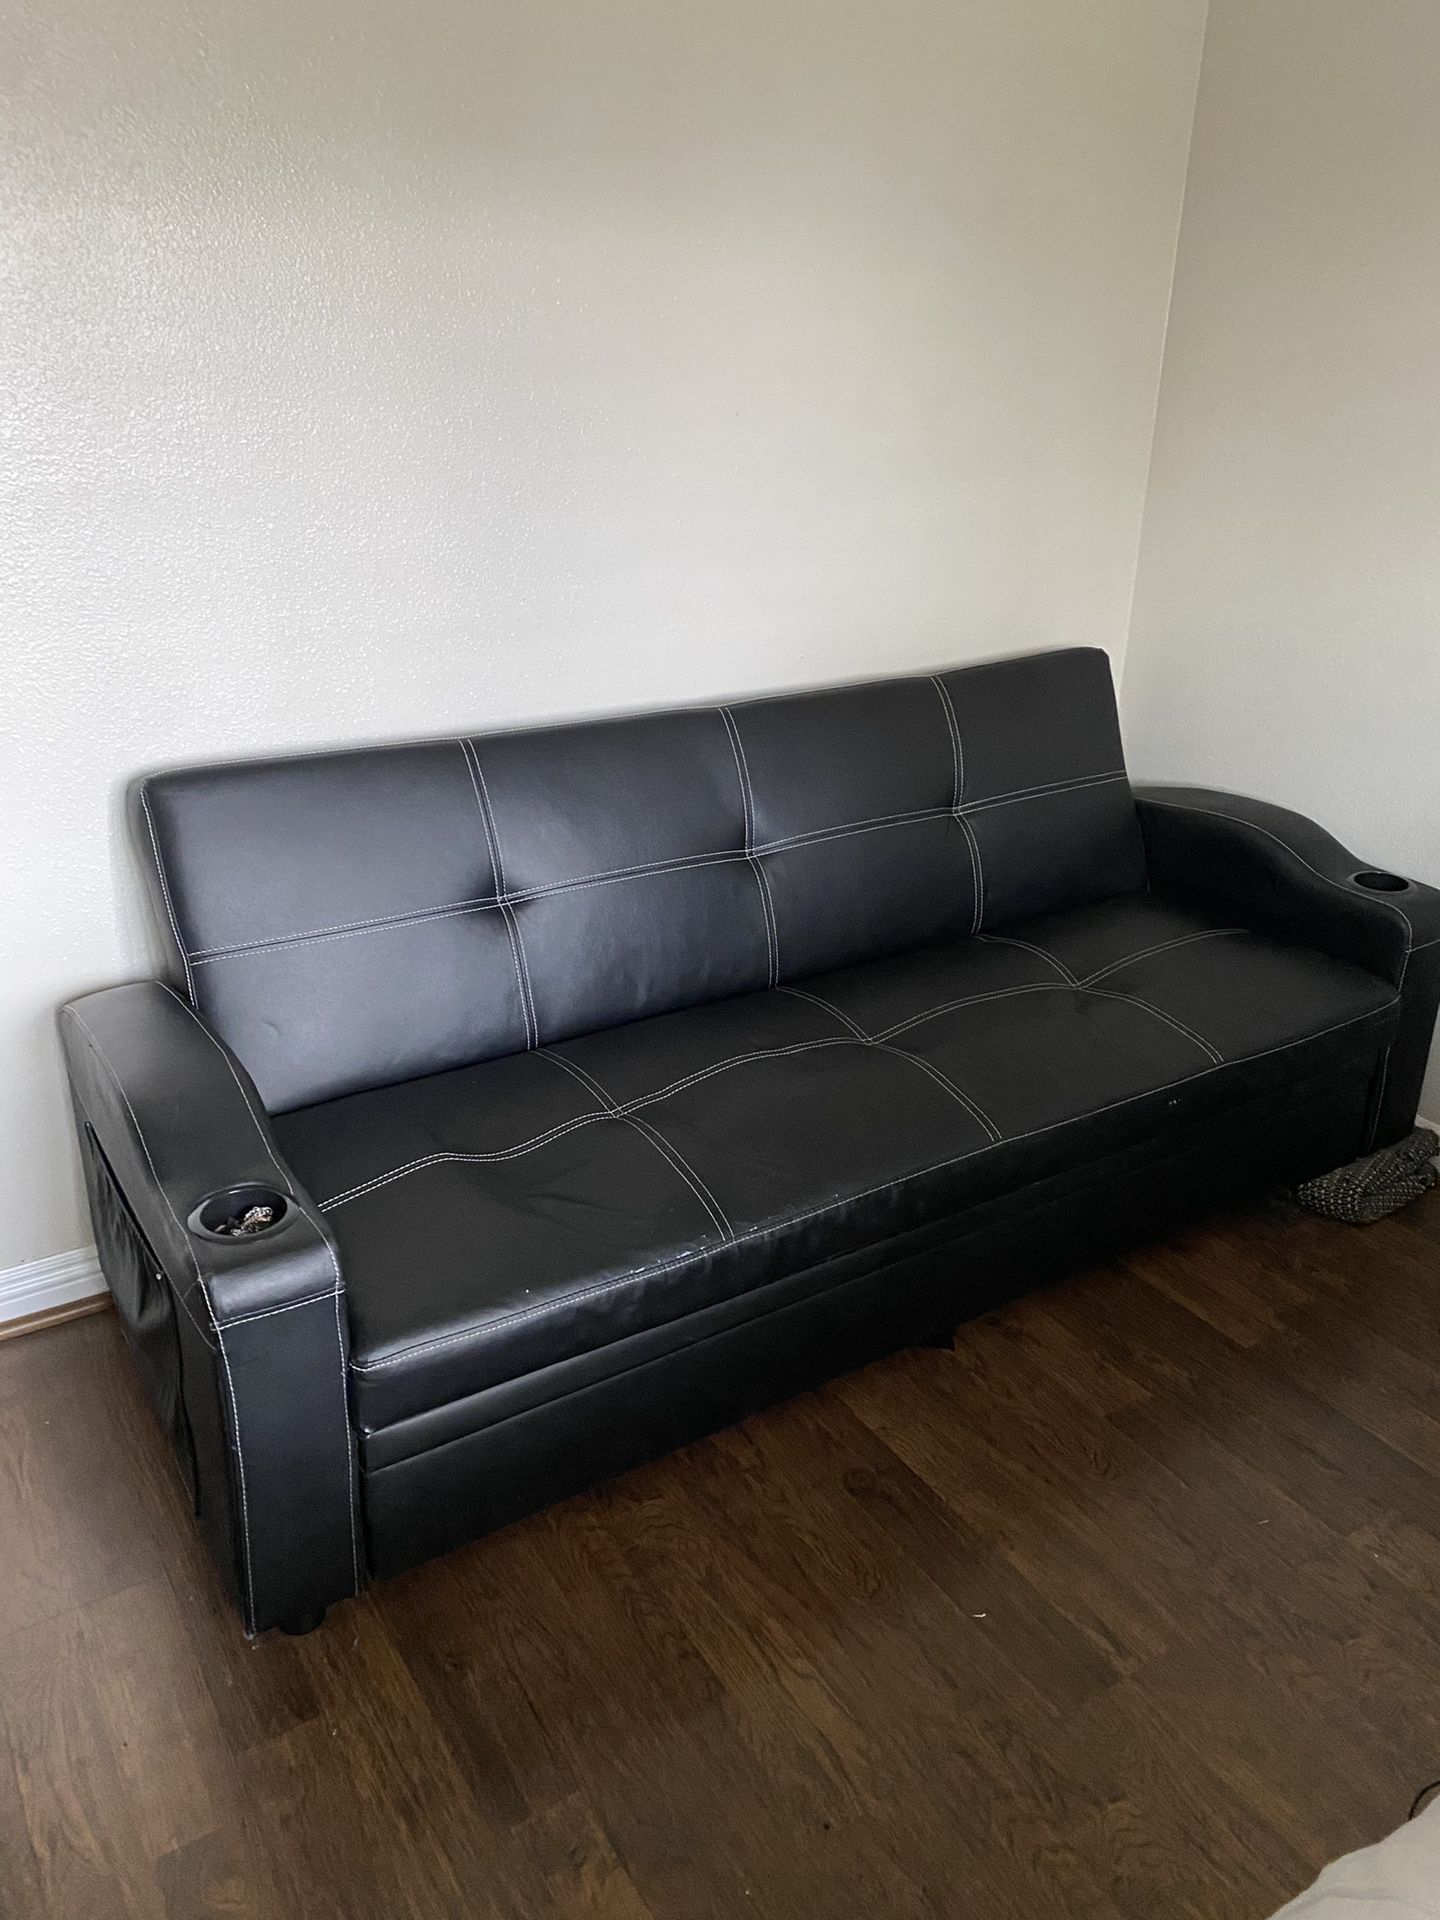 tri-fold pull out couch